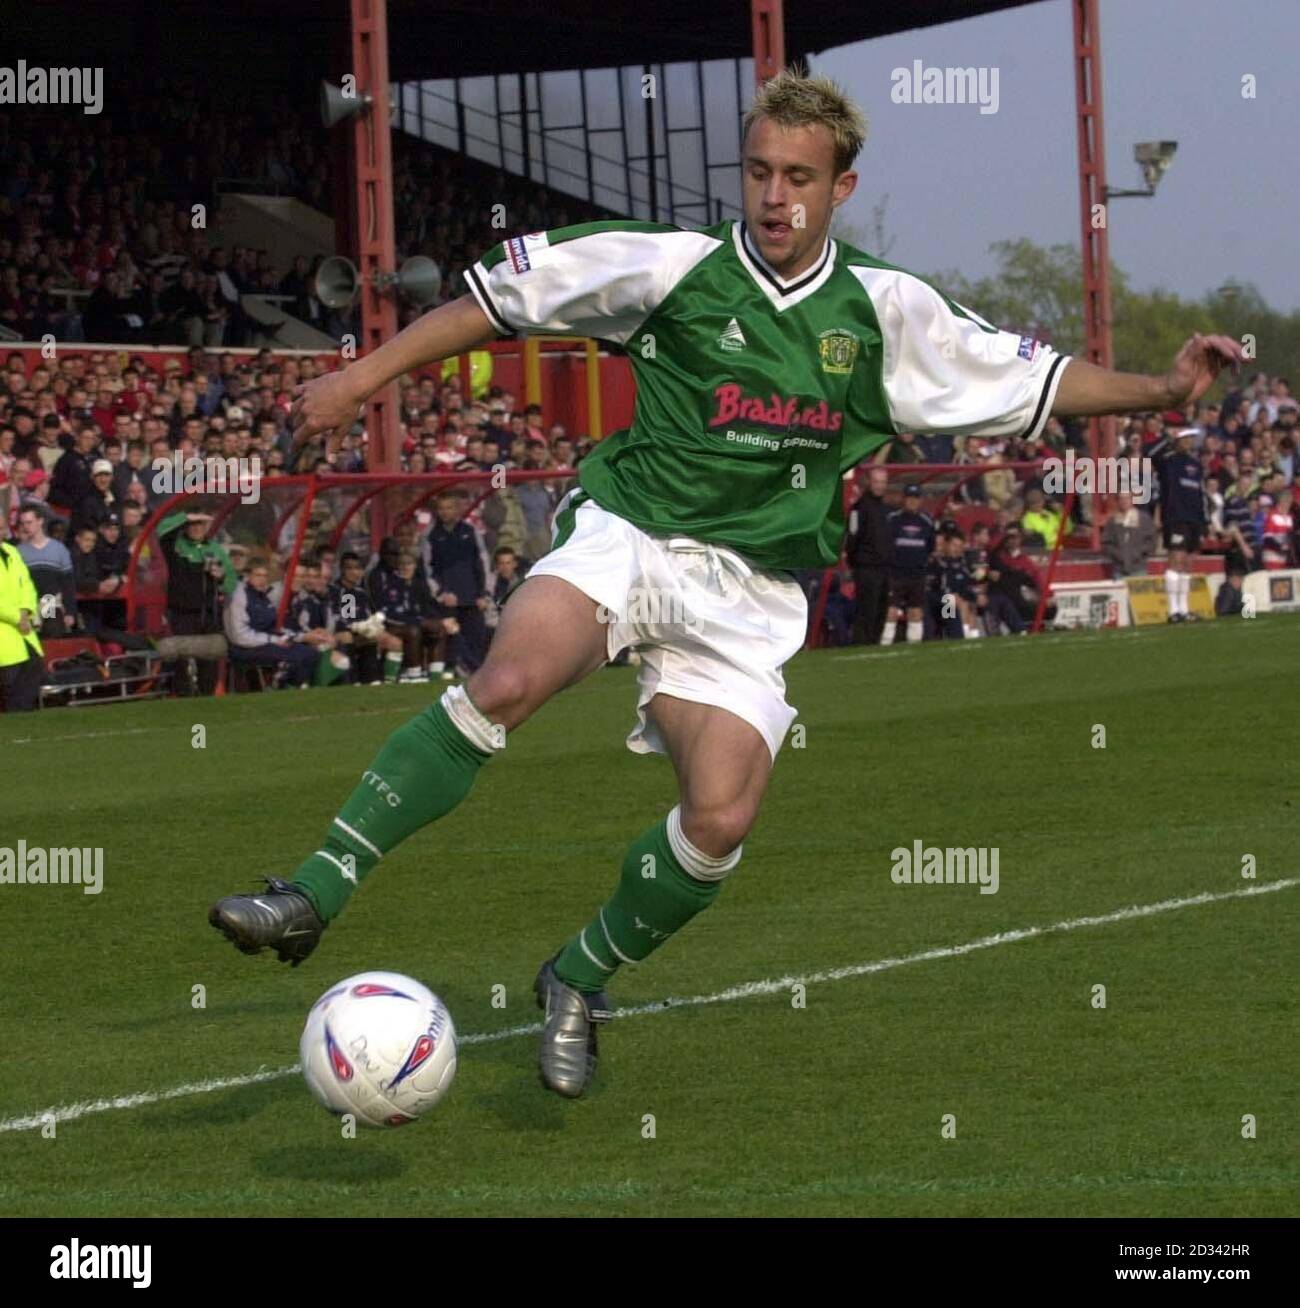 Yeovil Town's Andy Lindegaard gets in an early cross against Doncaster during their Nationwide Conference match at Doncaster's Belle Vue ground.  THIS PICTURE CAN ONLY BE USED WITHIN THE CONTEXT OF AN EDITORIAL FEATURE. NO UNOFFICIAL CLUB WEBSITE USE. Stock Photo